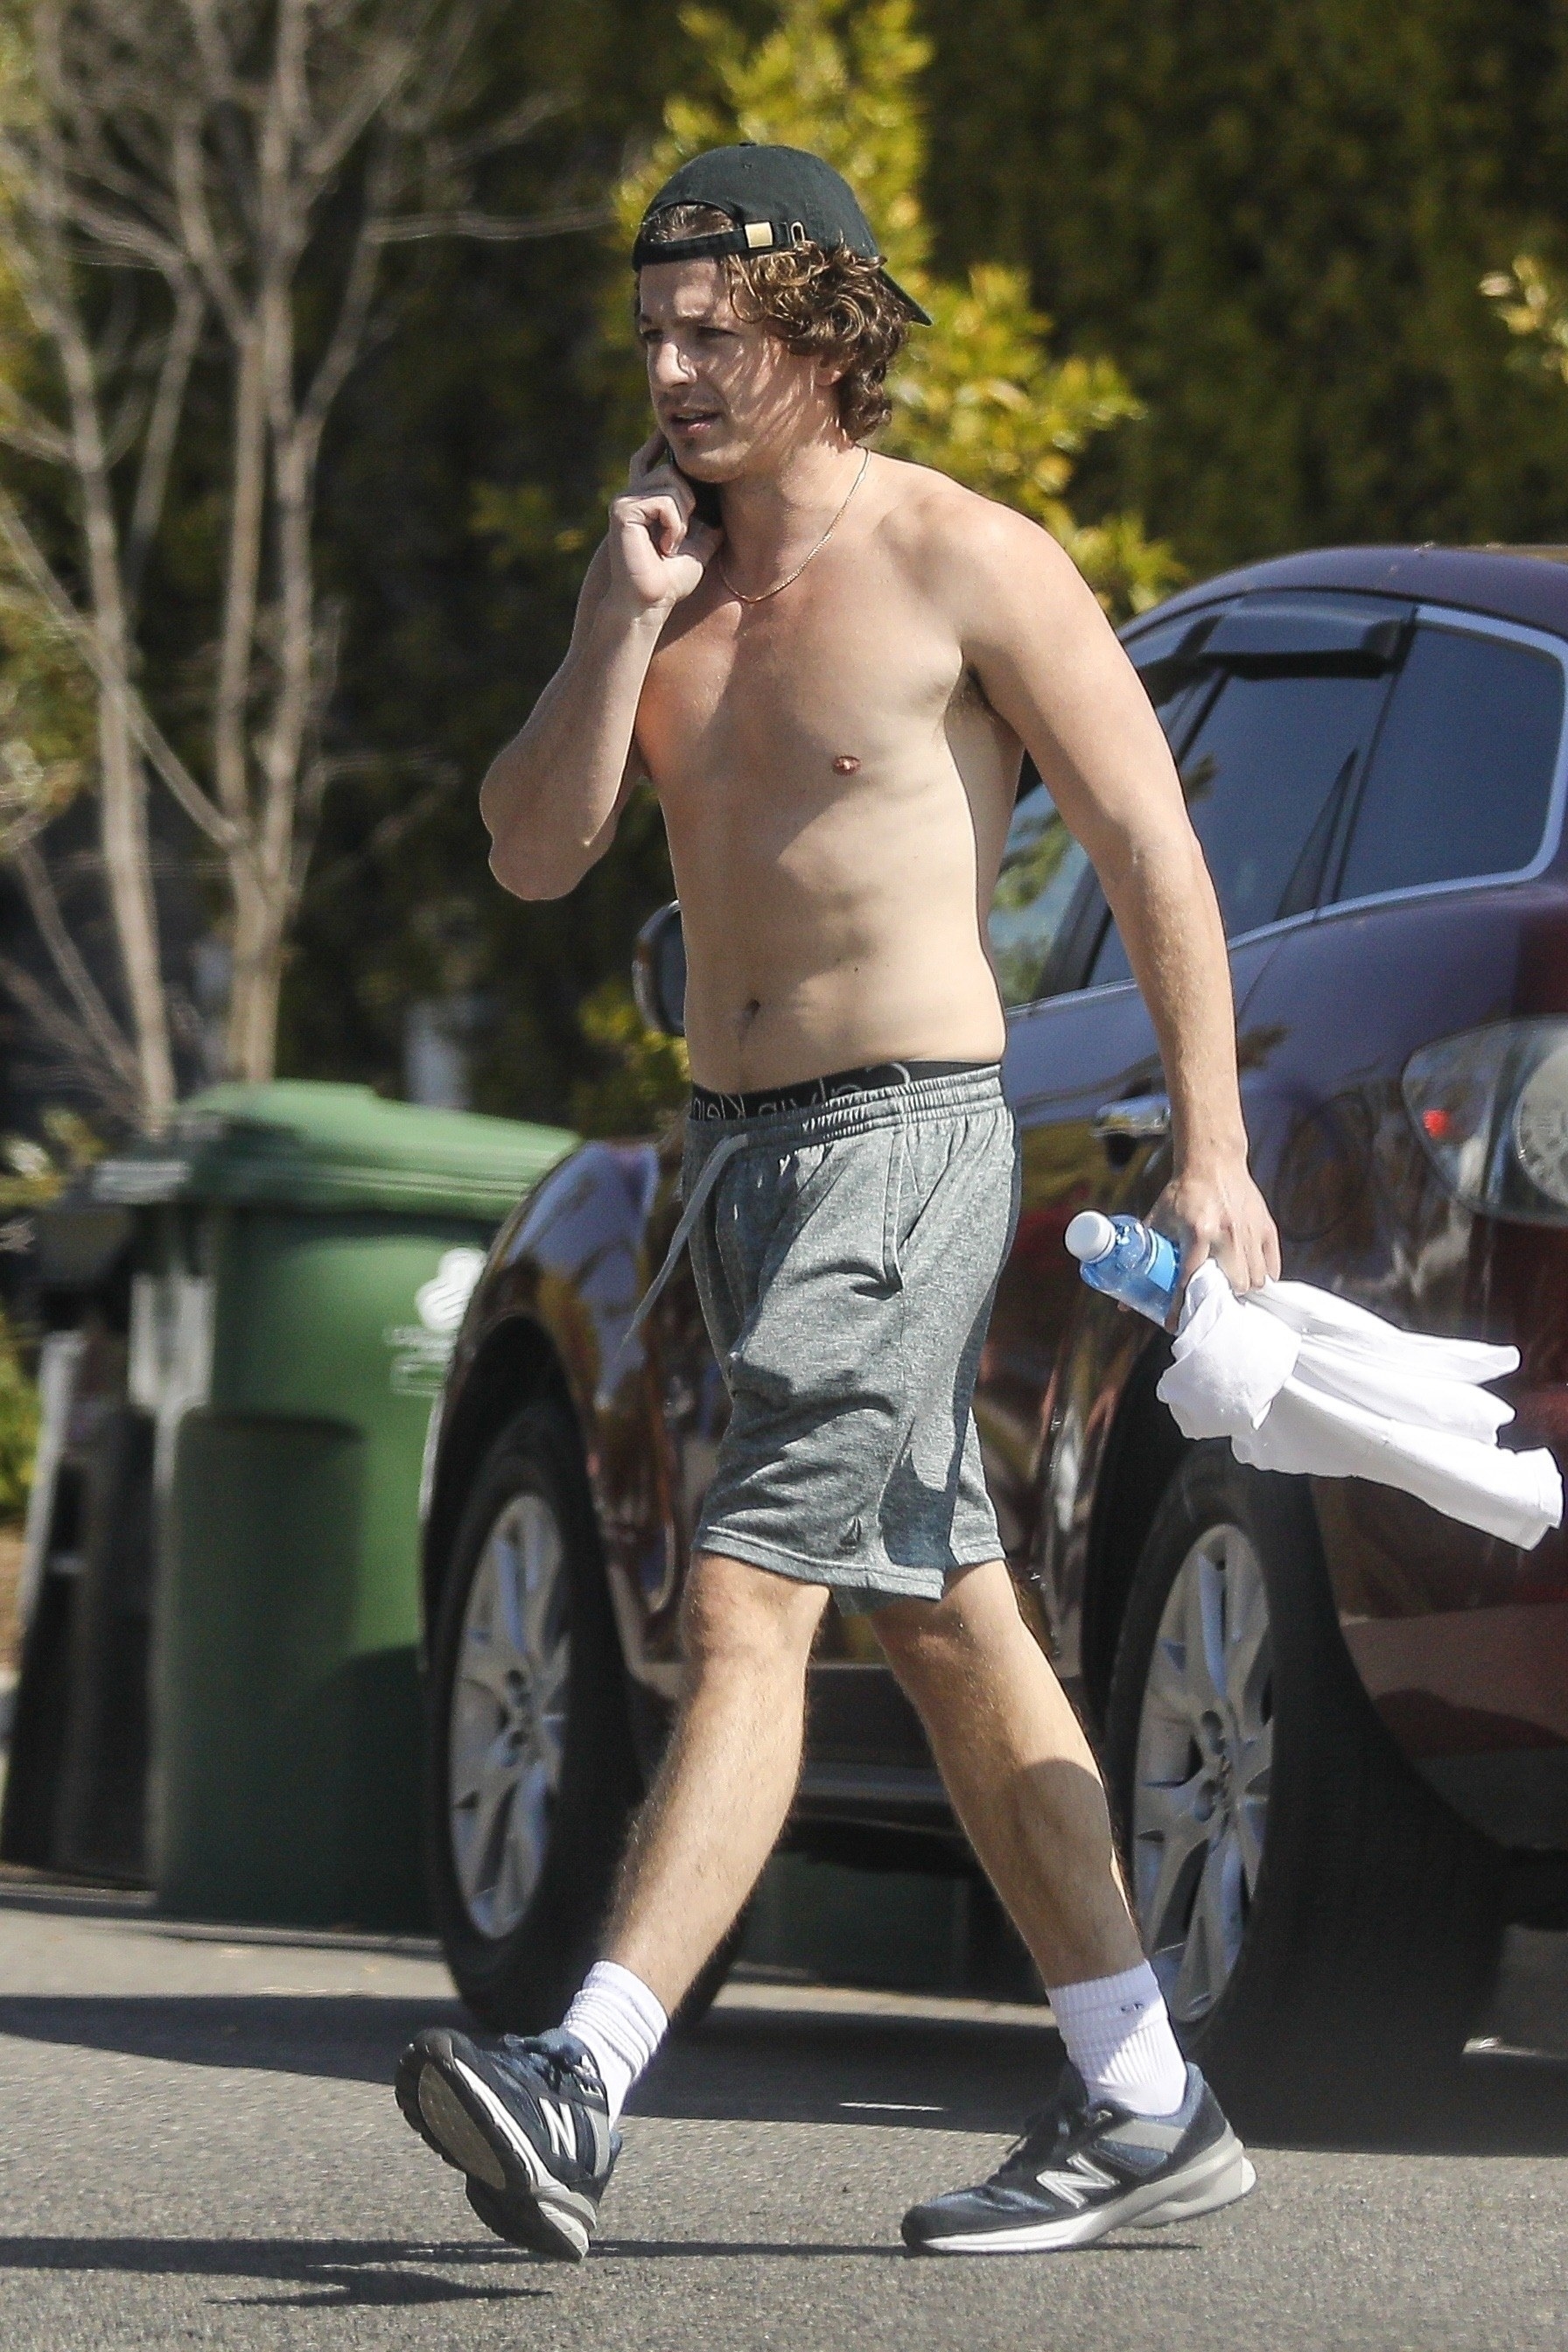 Another photo of shirtless Charlie wearing shorts and sneakers and holding a phone, T-shirt, and cellphone